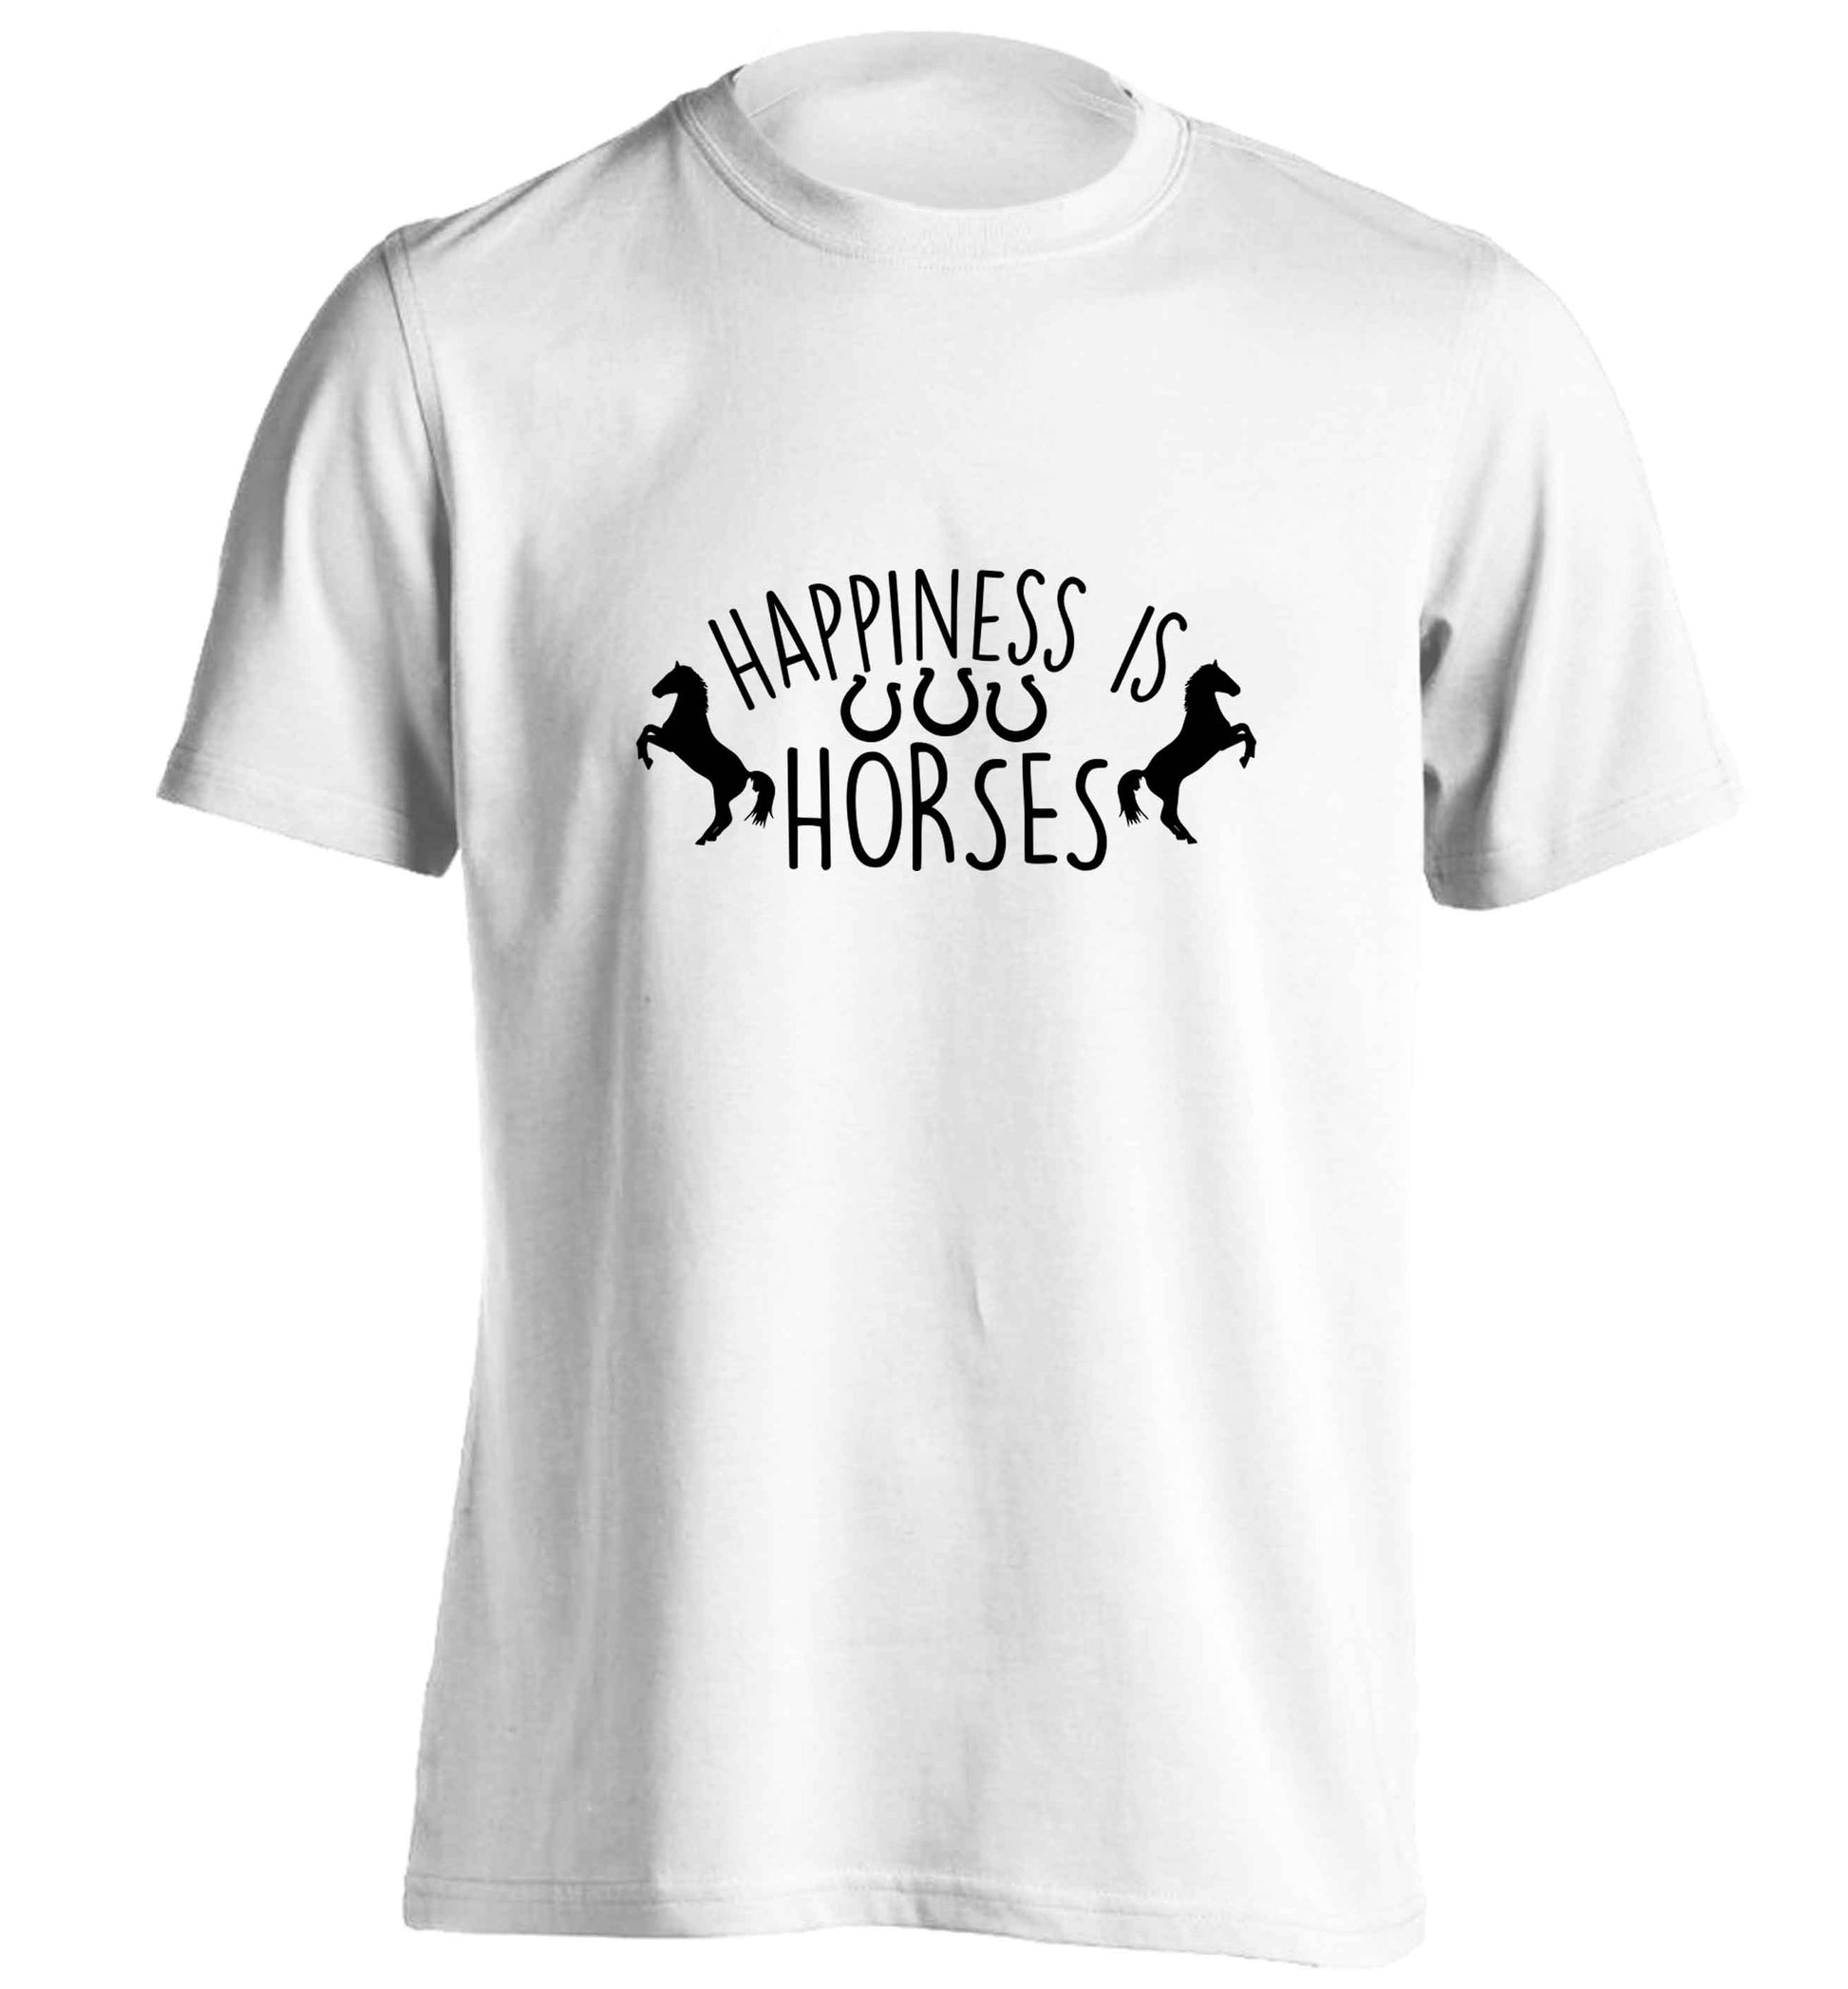 Happiness is horses adults unisex white Tshirt 2XL